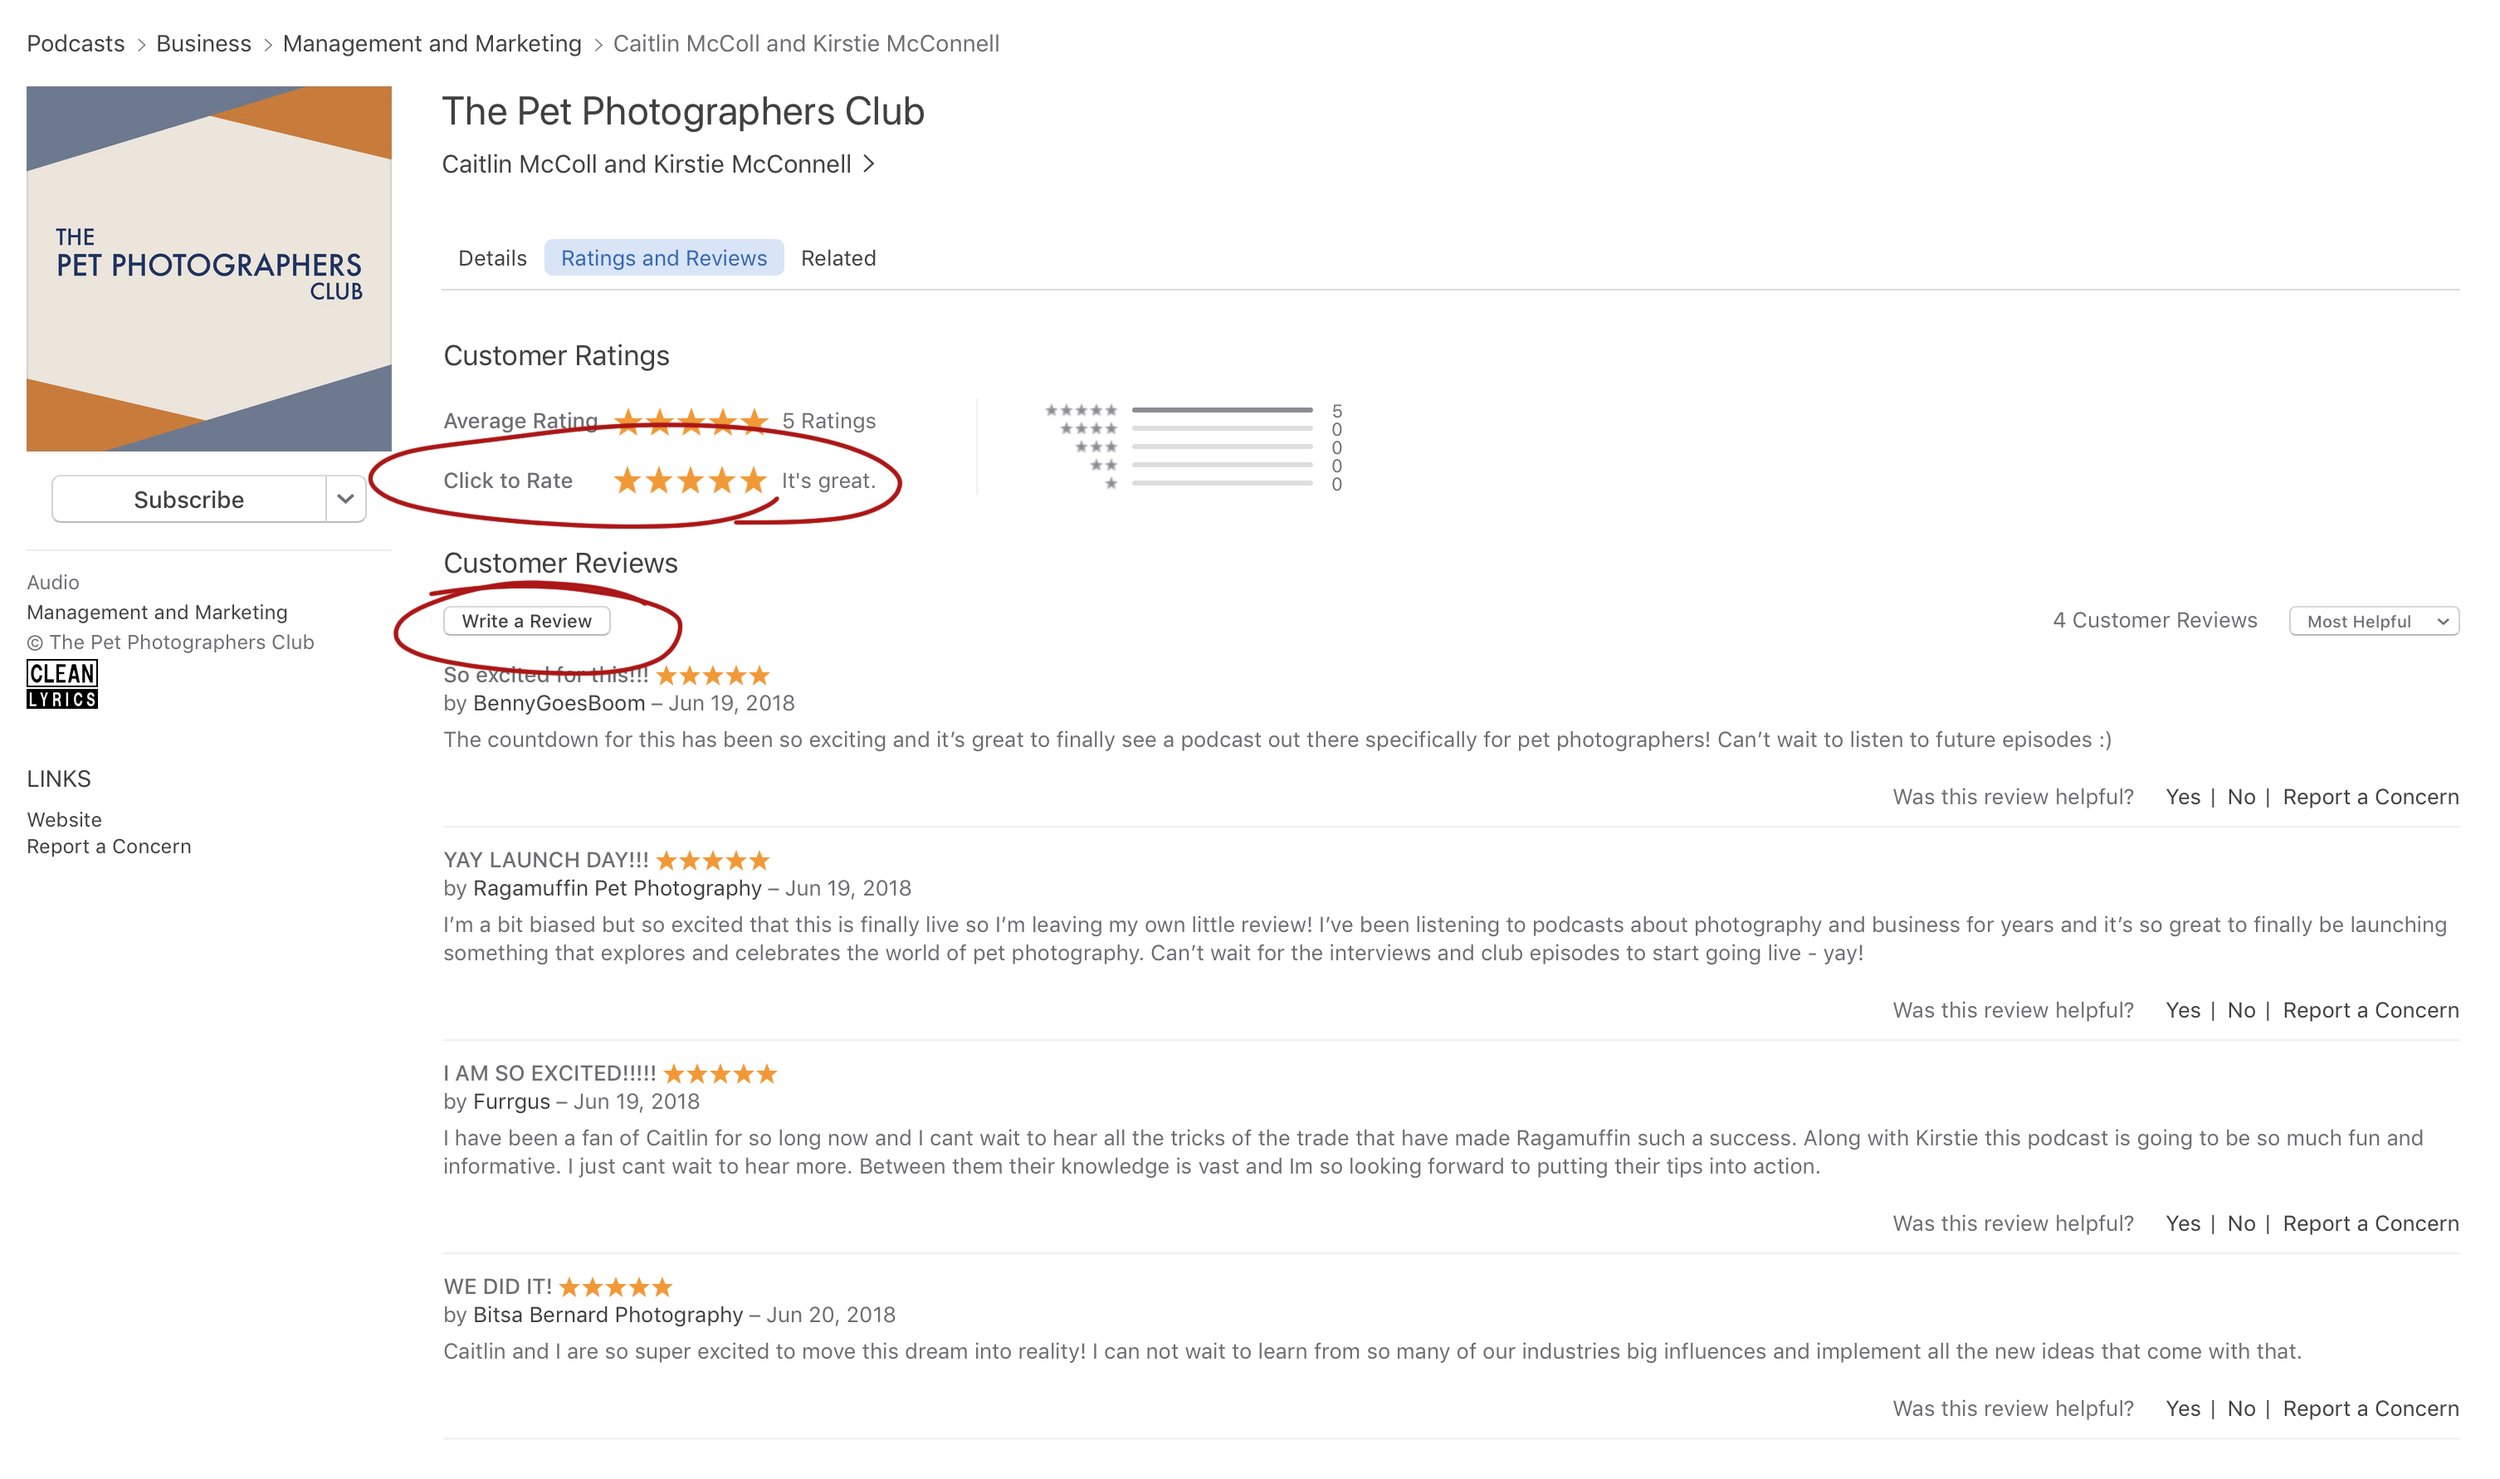 How To Rate And Review In Itunes The Pet Photographers Club